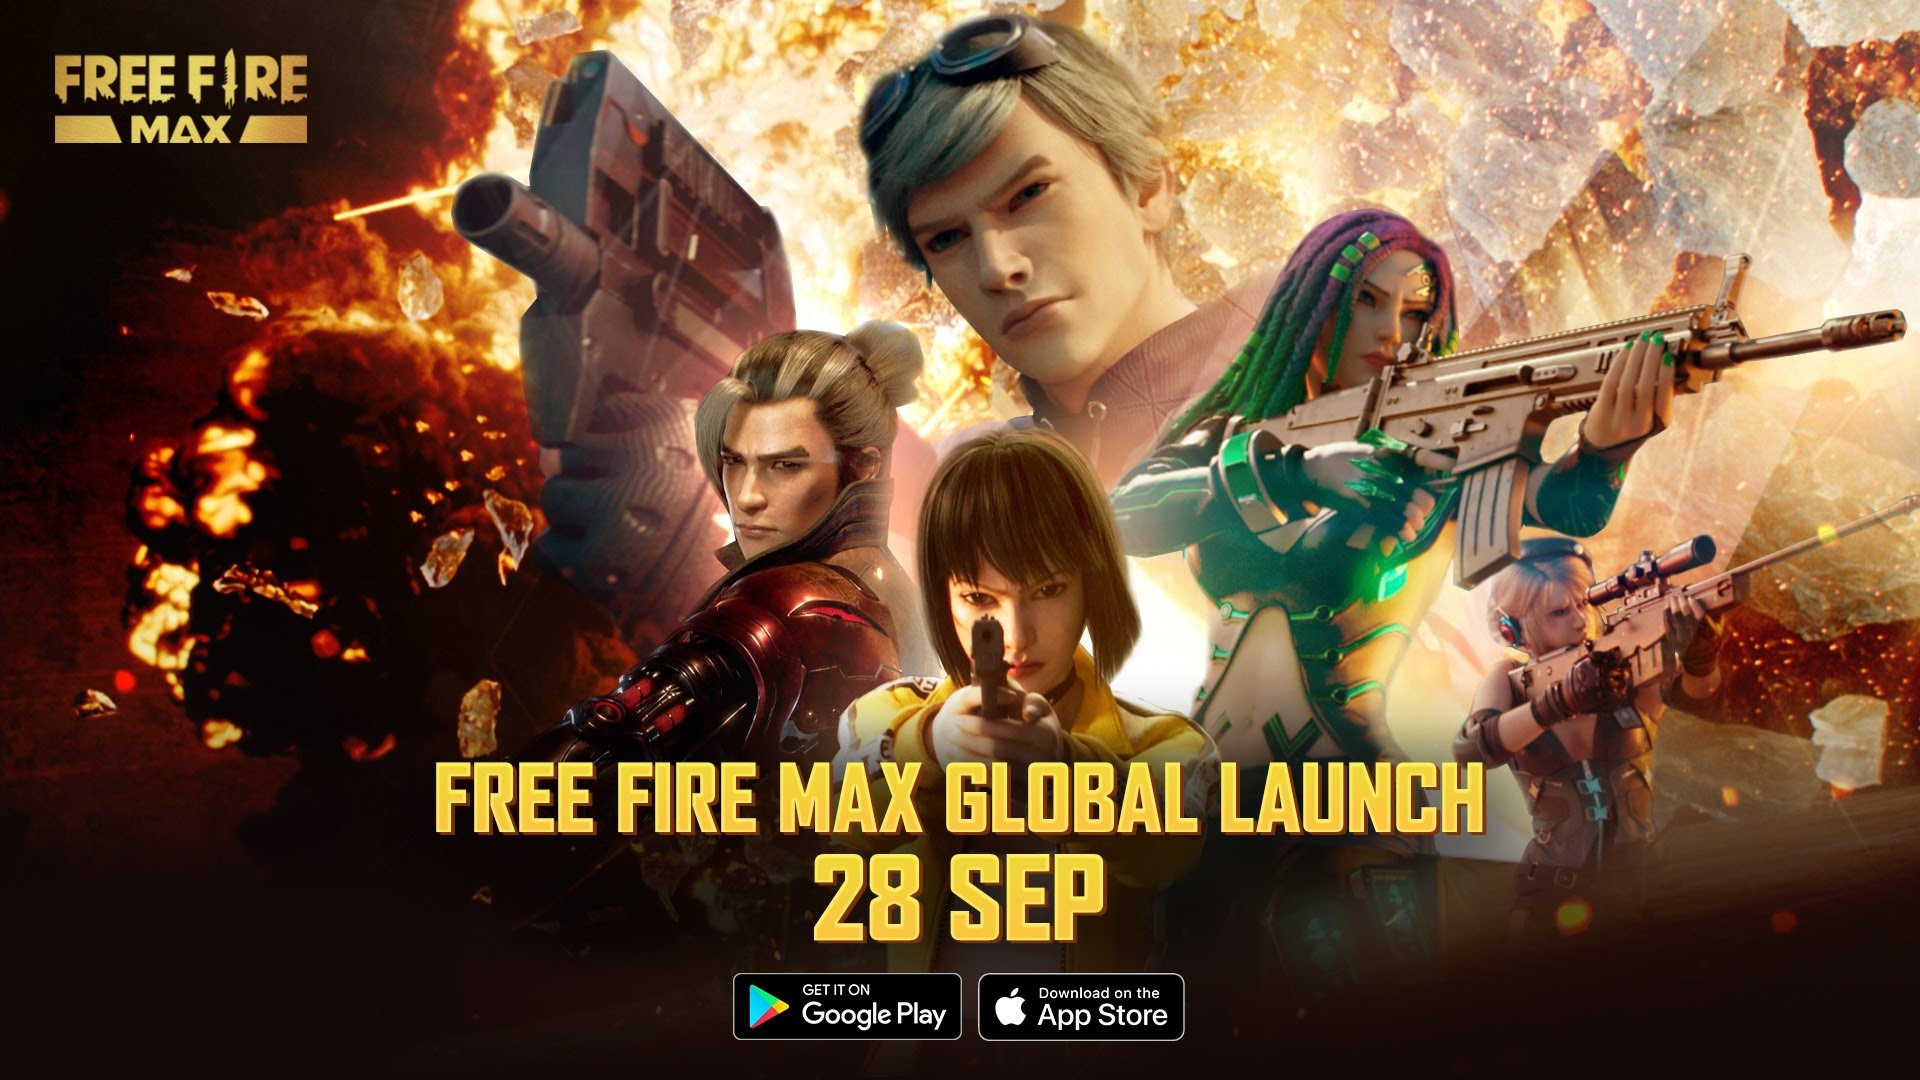 Free Fire MAX will be released globally on Sept. 28 - Dot Esports